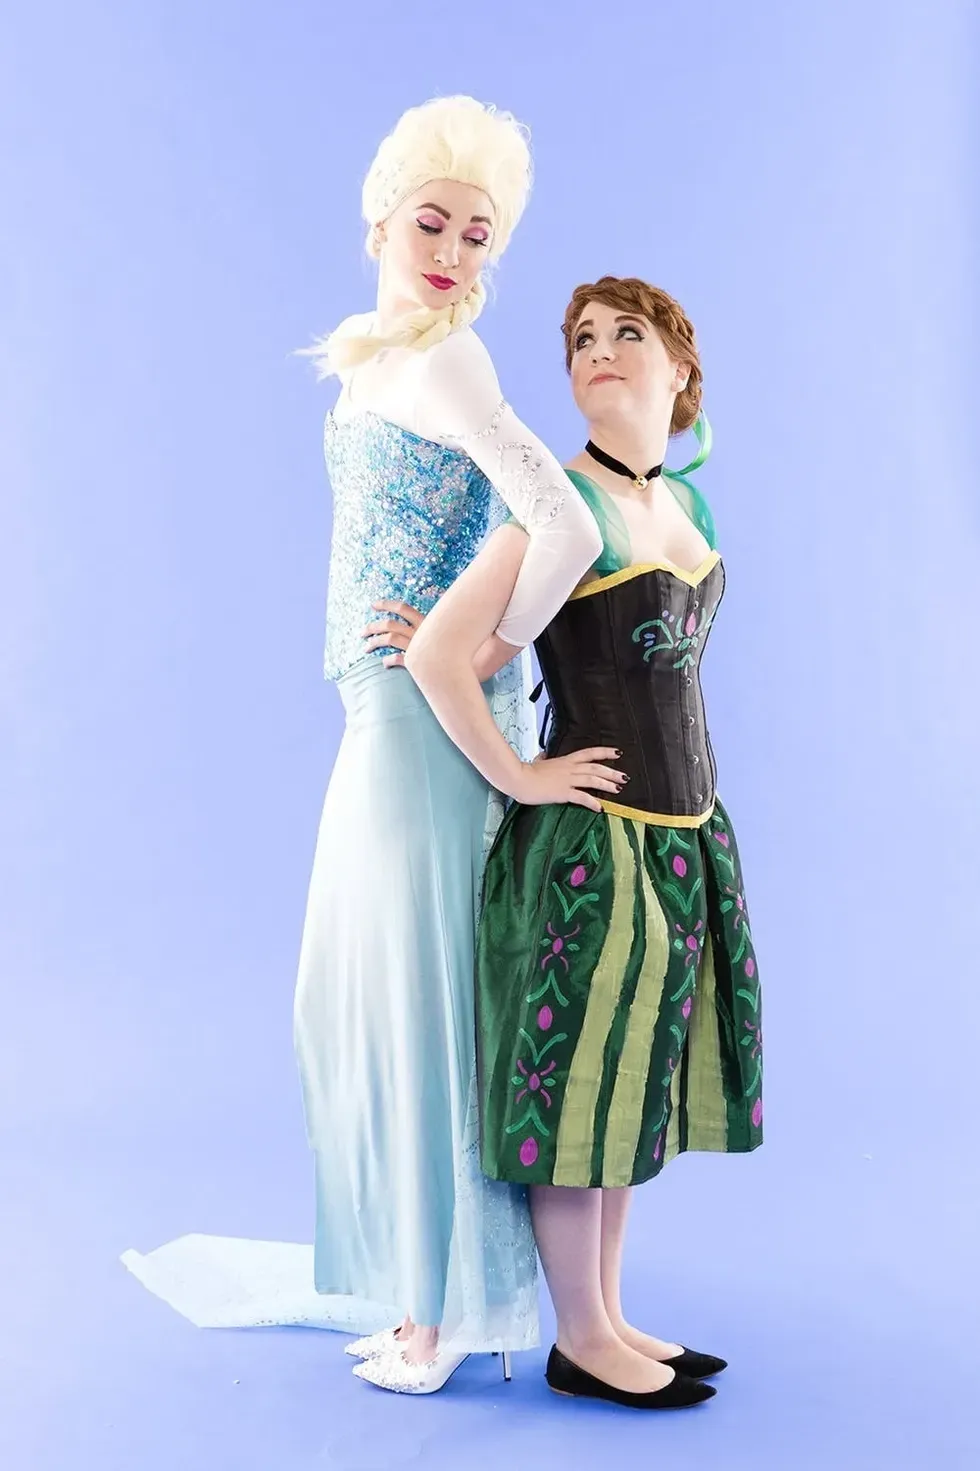 Anna and Elsa from "Frozen"